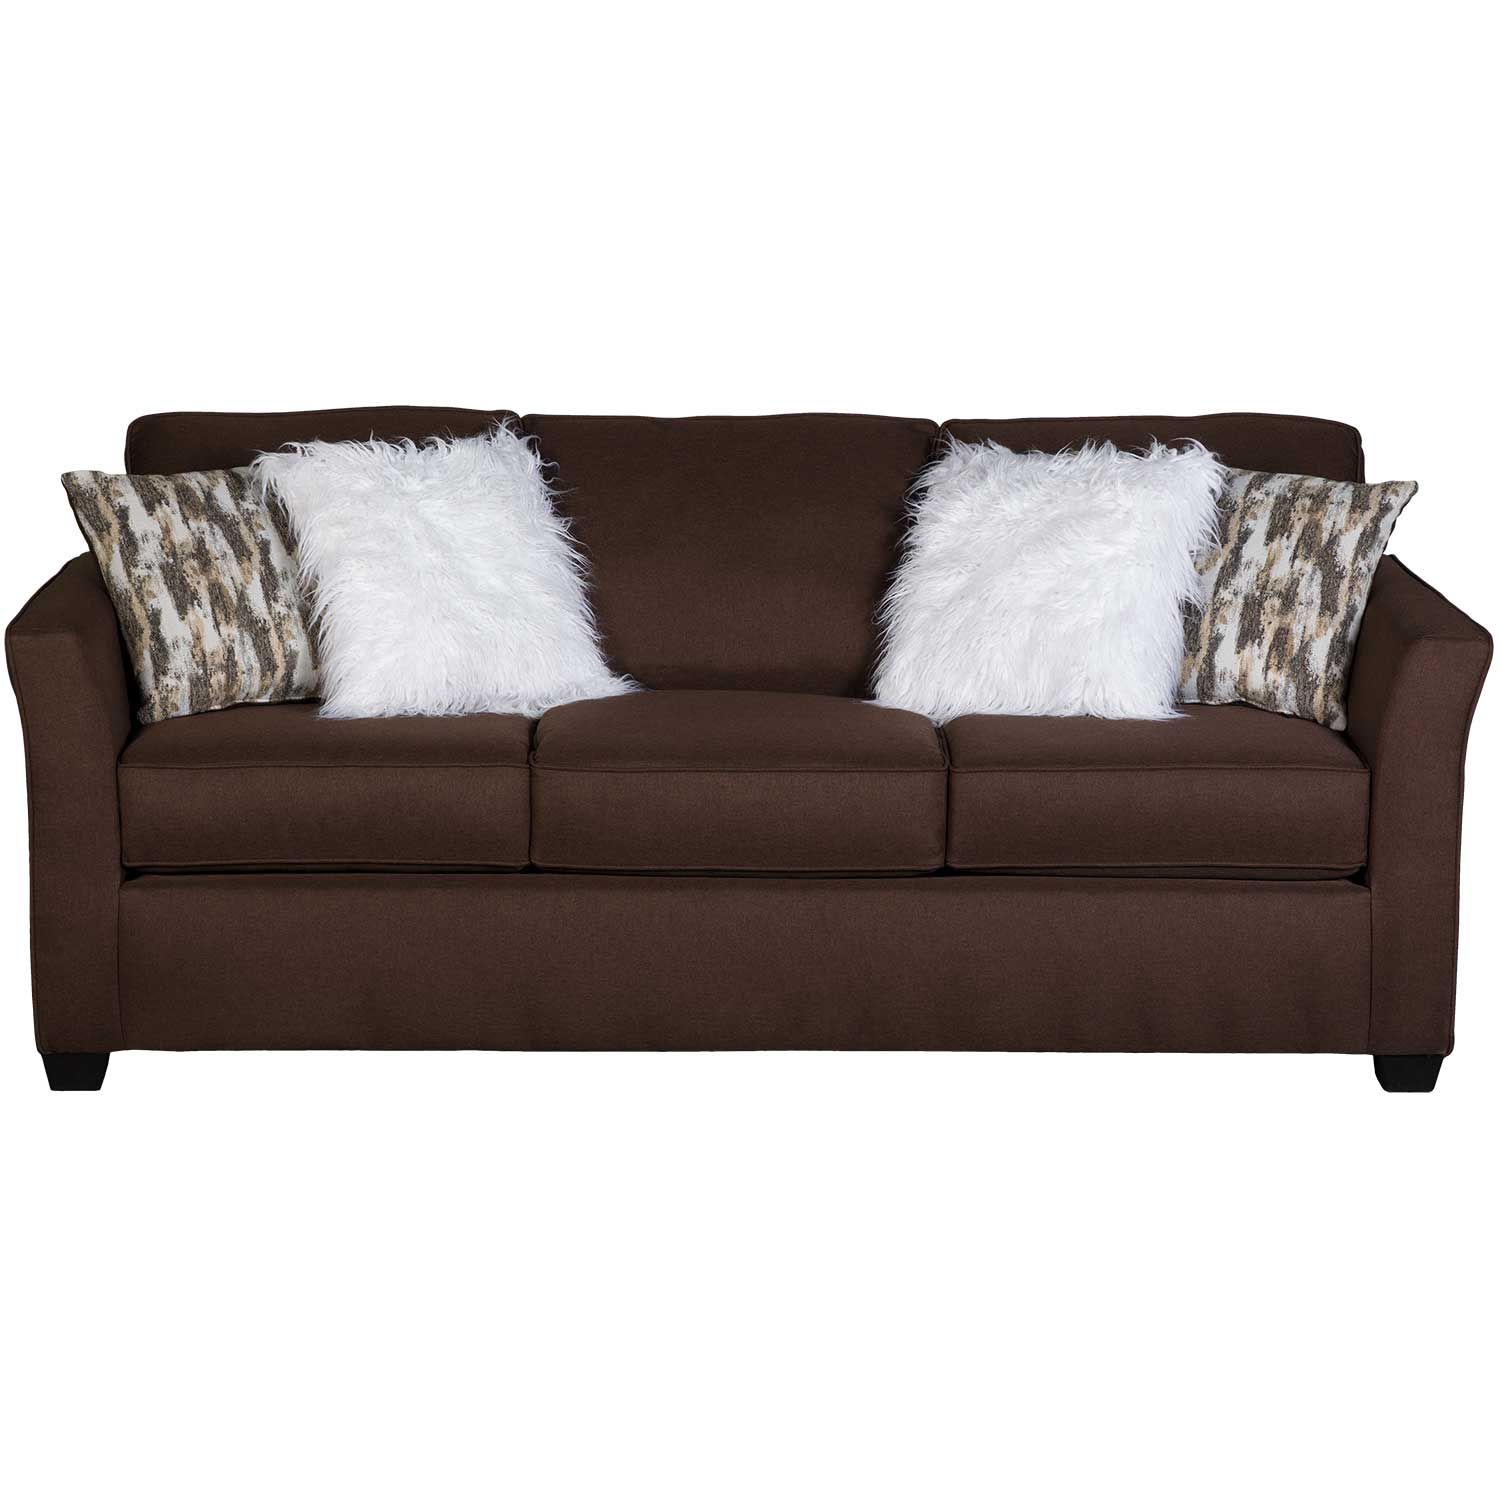 Keegan Chocolate Brown Sofa | Z 1003 | Afw For Sofas In Chocolate Brown (Photo 4 of 15)